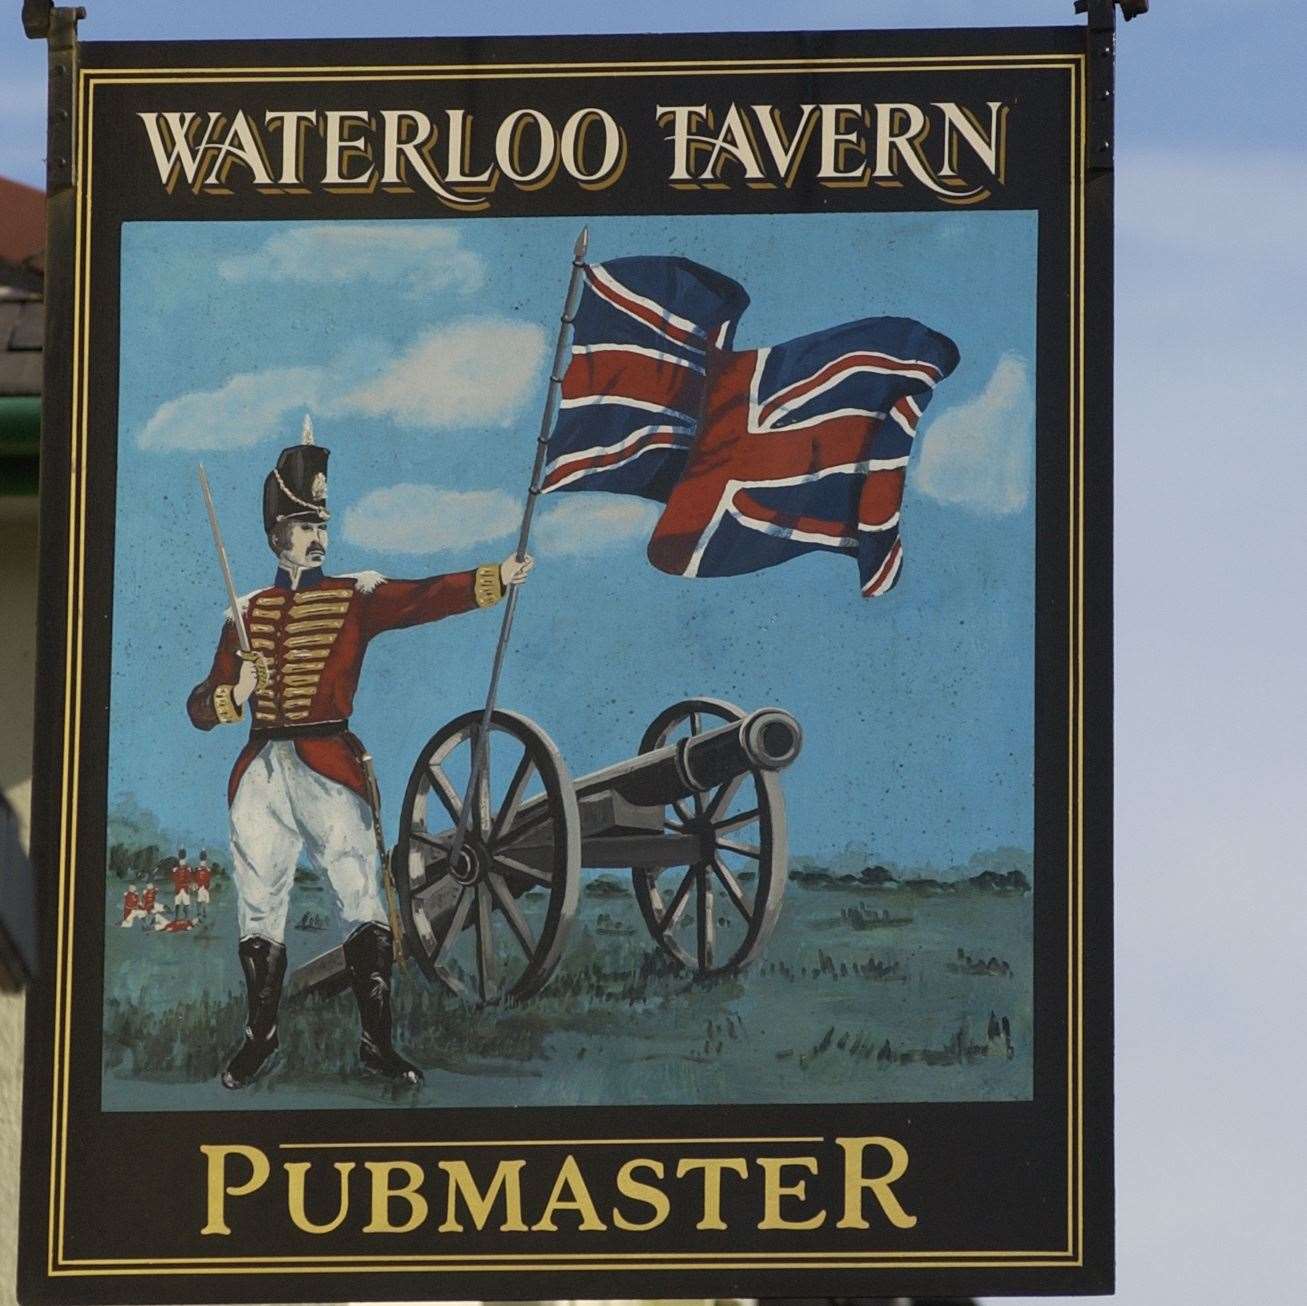 It was formerly called the Waterloo Tavern